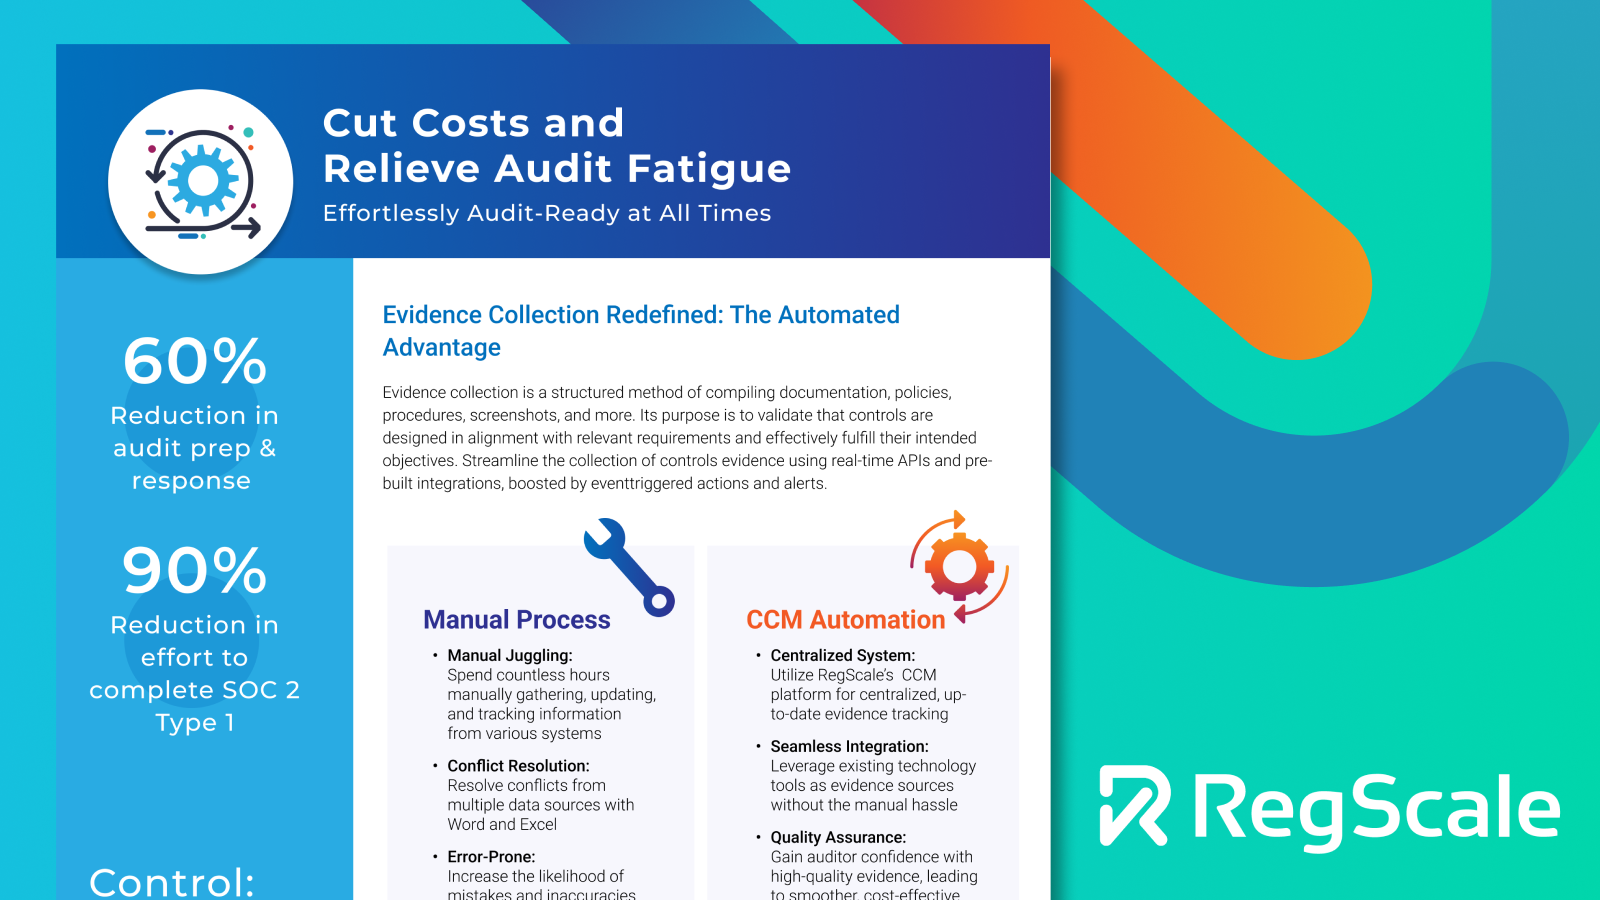 Cut Costs and Relieve Audit Fatigue